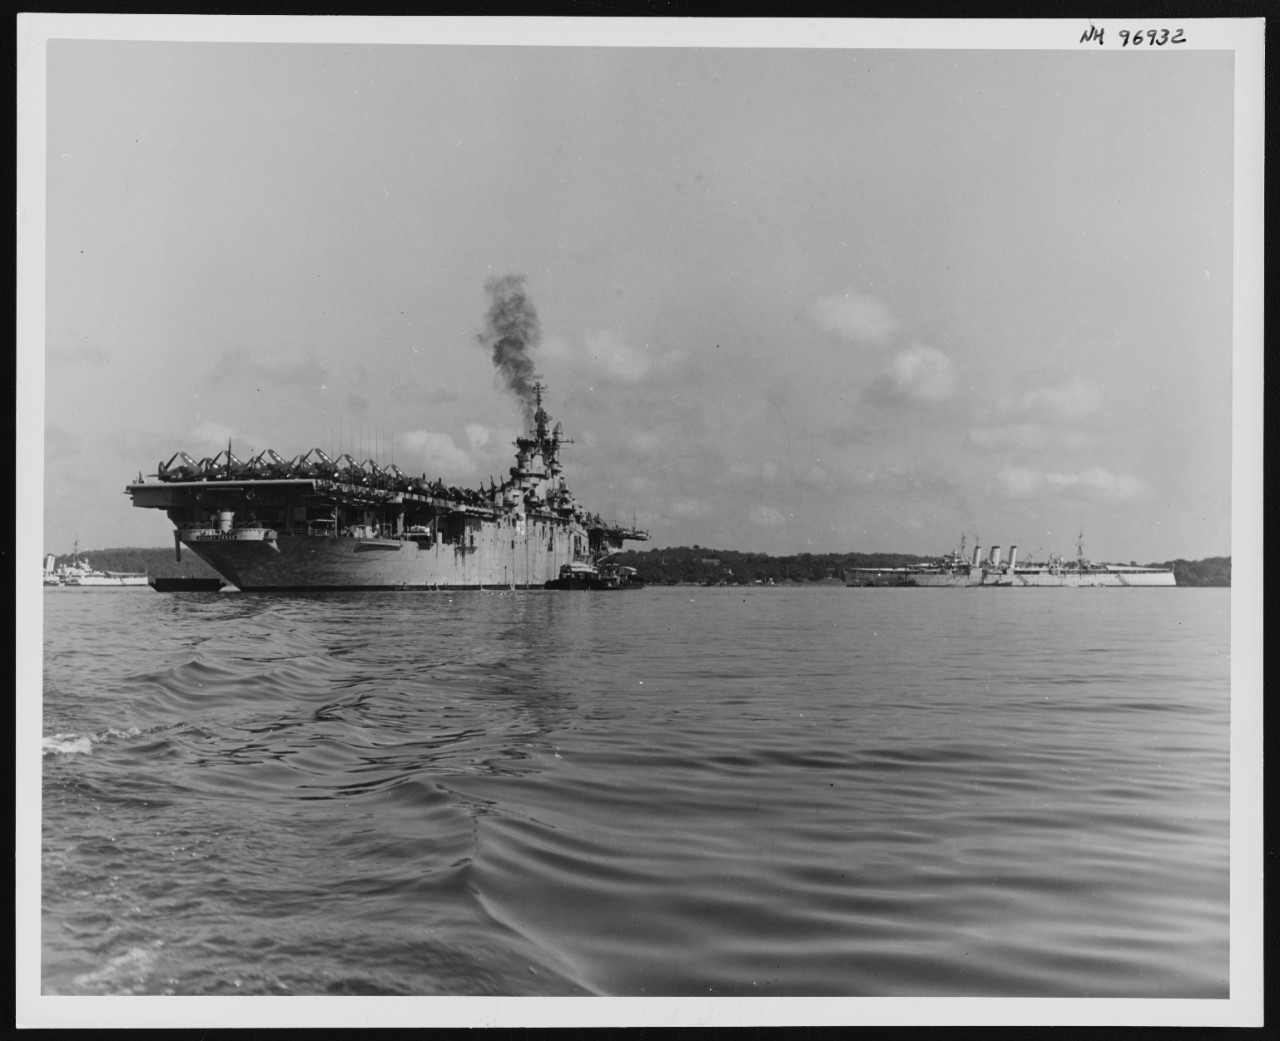 Photo #: NH 96932  USS Valley Forge (CV-45)